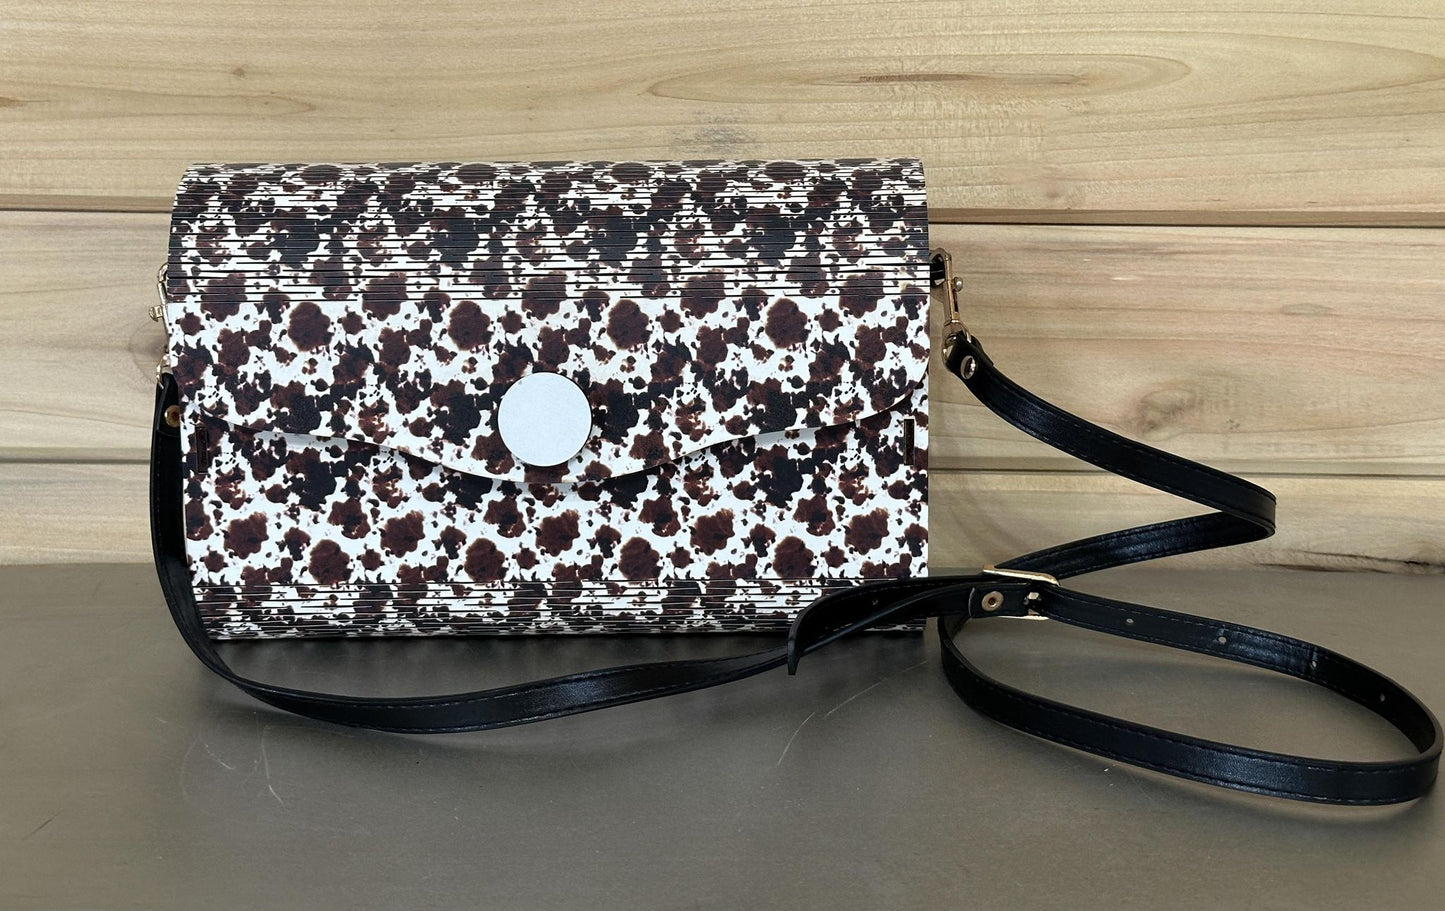 Cow Print Wooden Clutch Purse - Great for a special occasion!